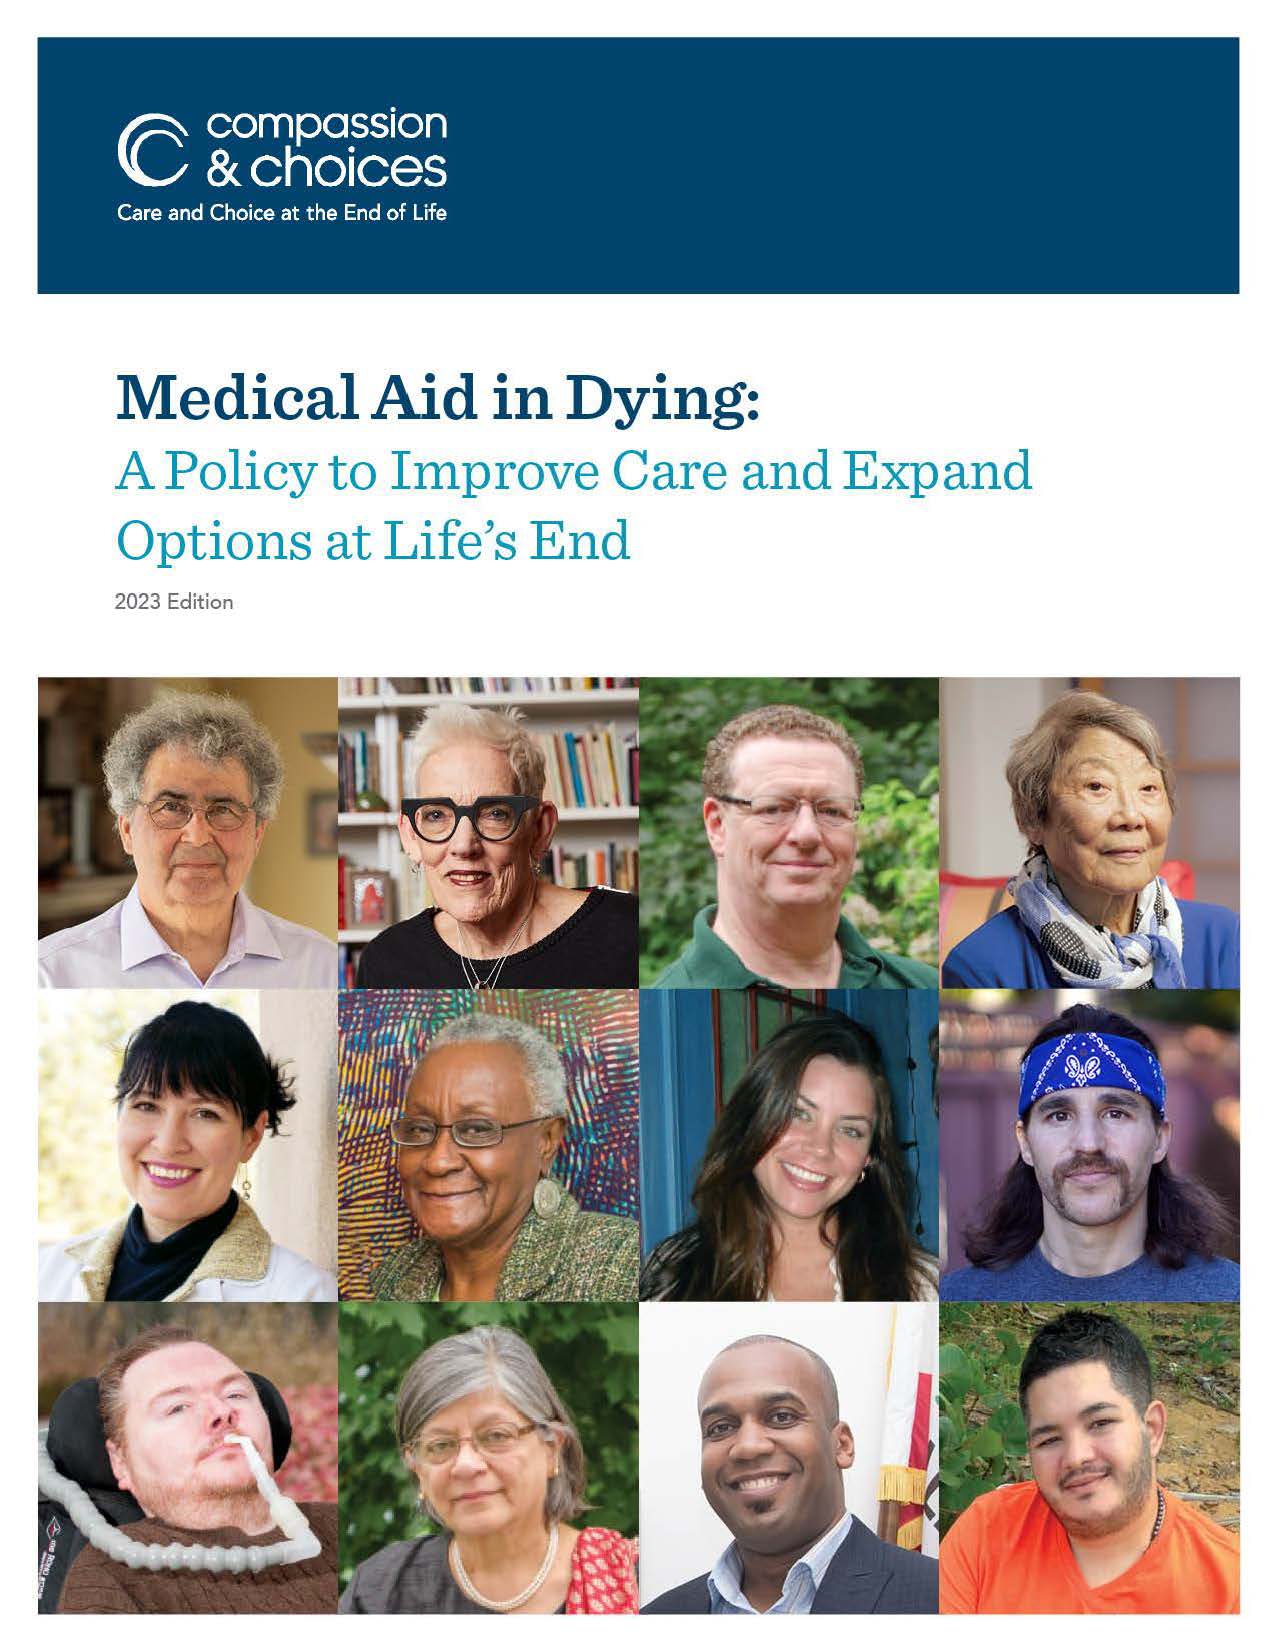 2023 Medical Aid in Dying Policy Book Cover